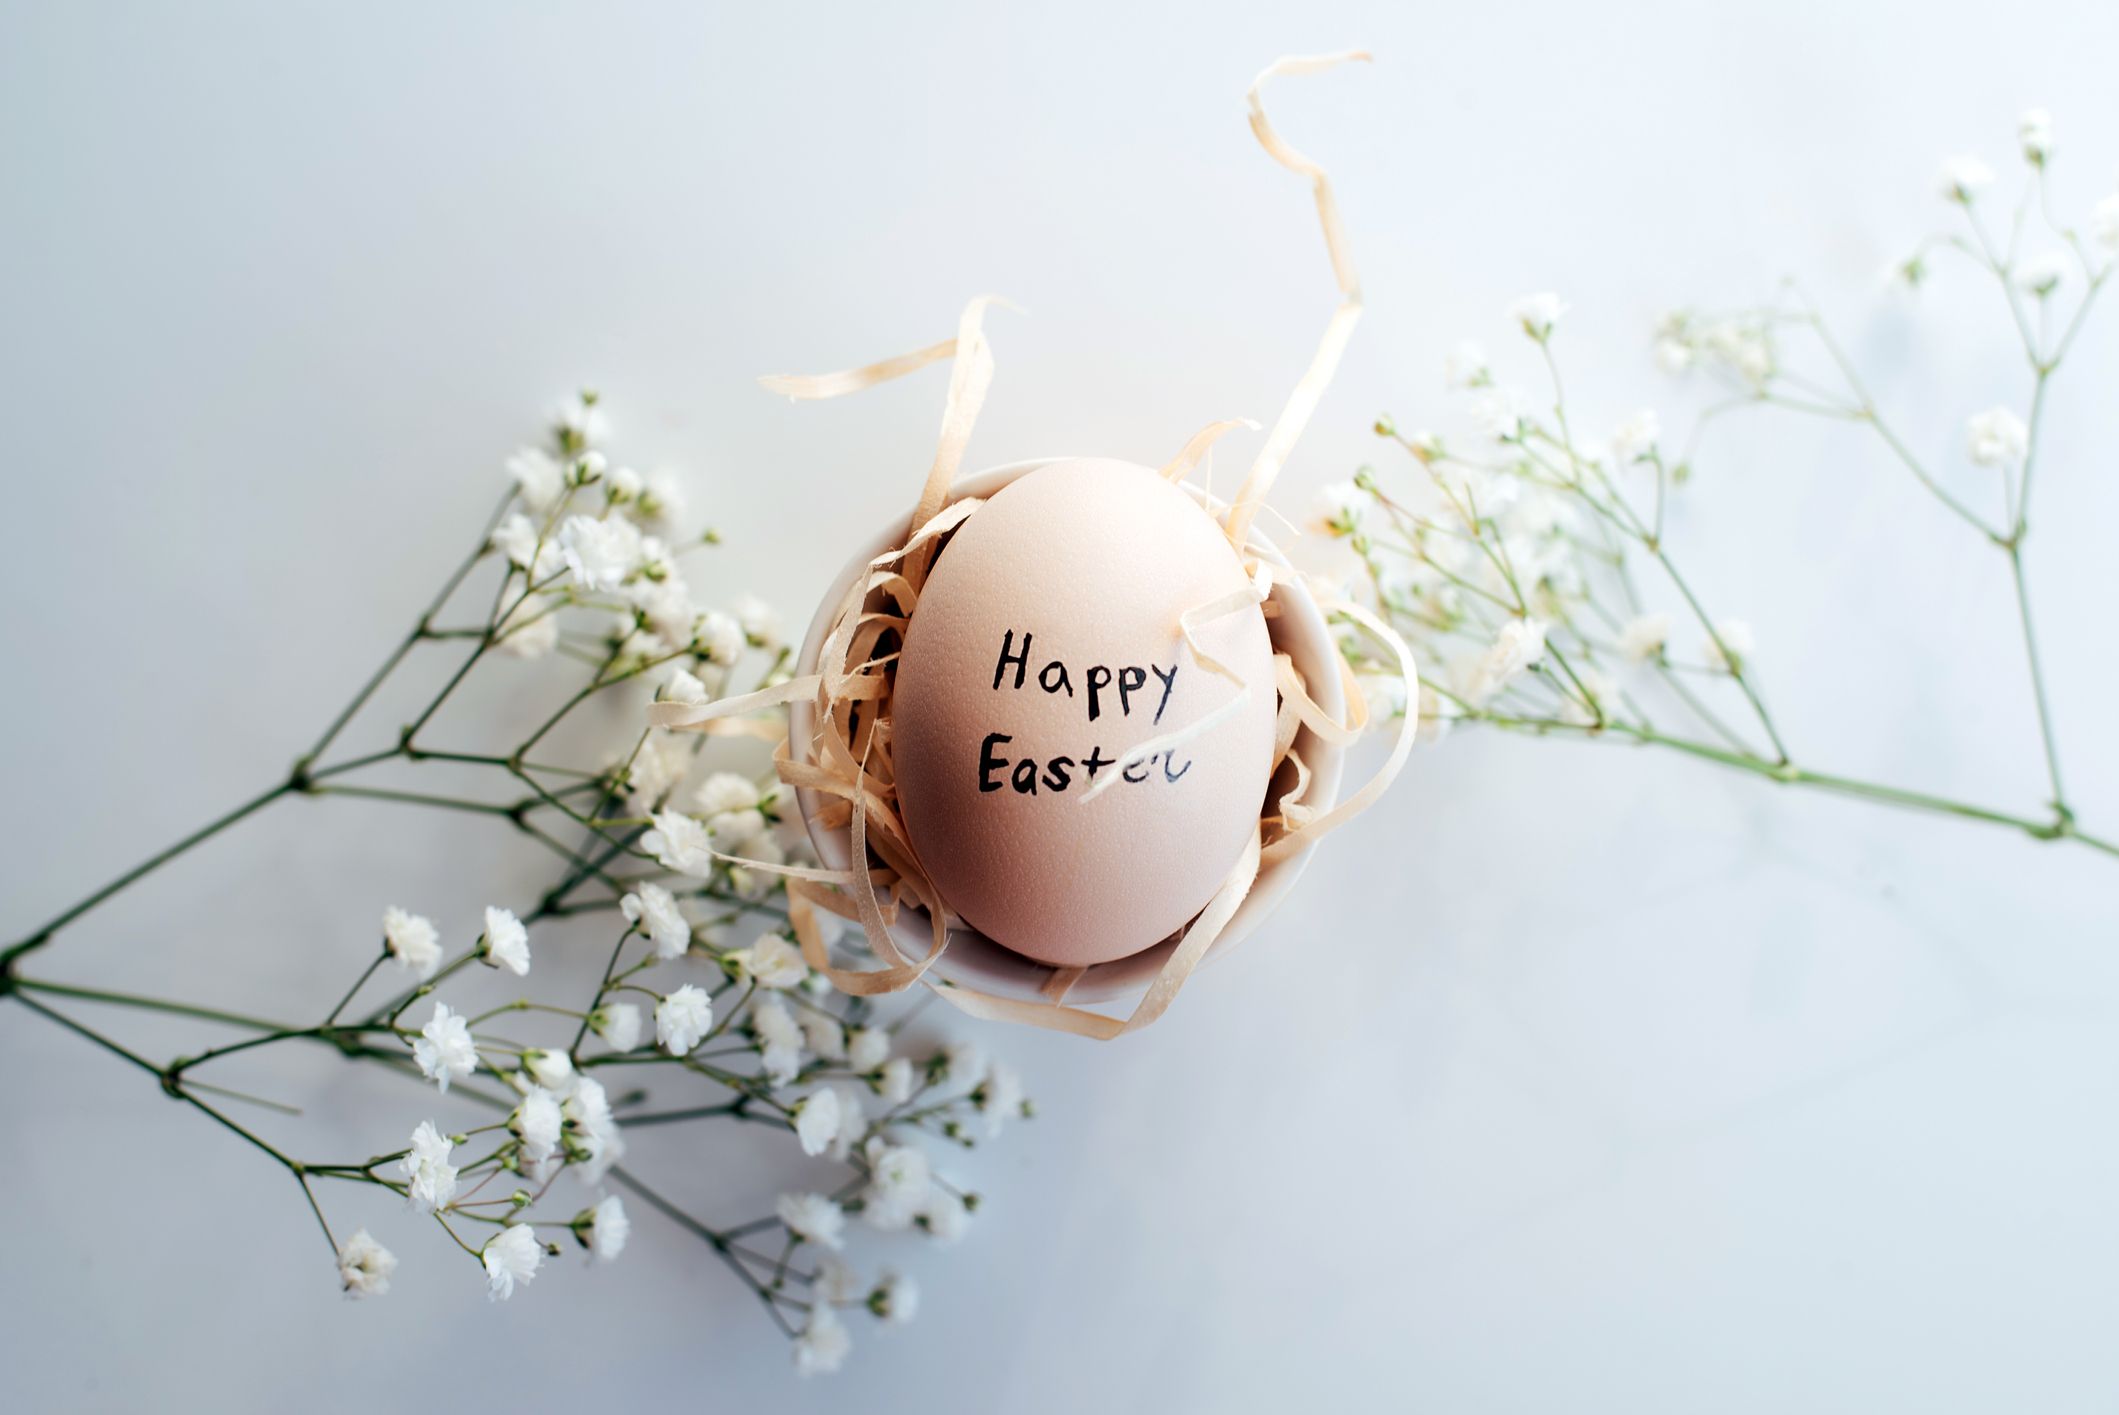 80 Best Easter Quotes 2023 - Inspiring Sayings About Easter